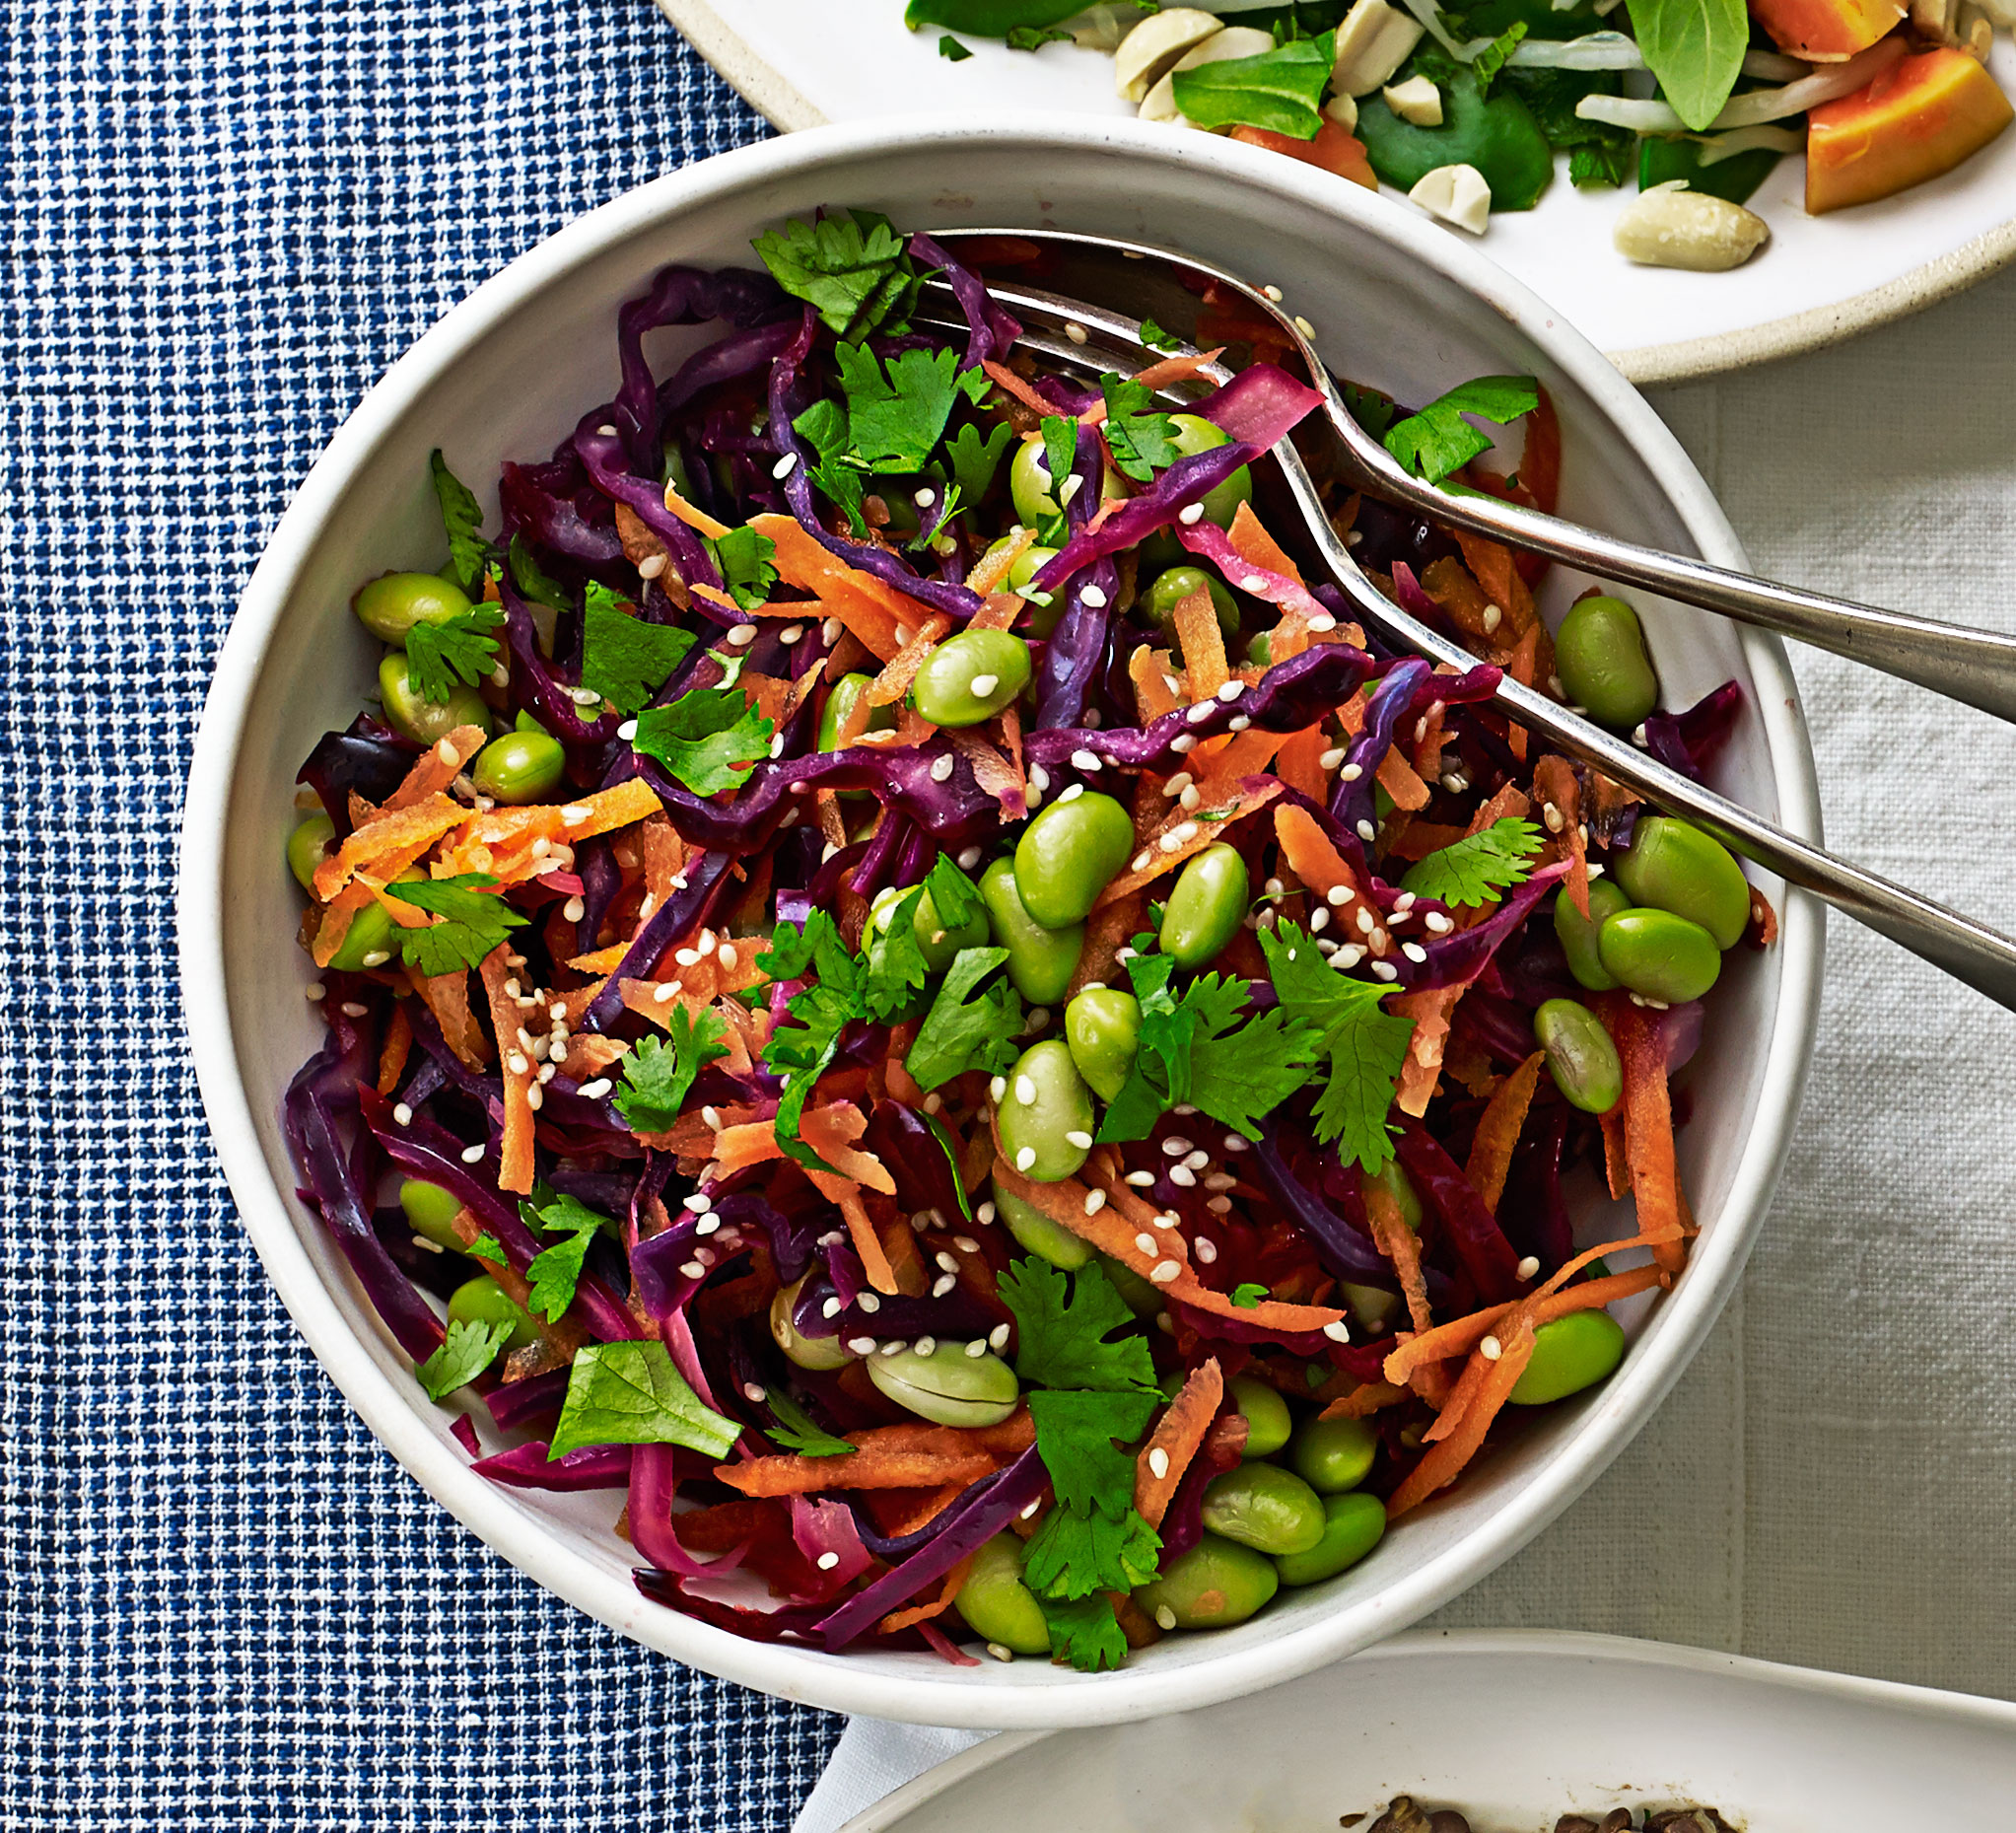 Red cabbage with carrot & edamame beans